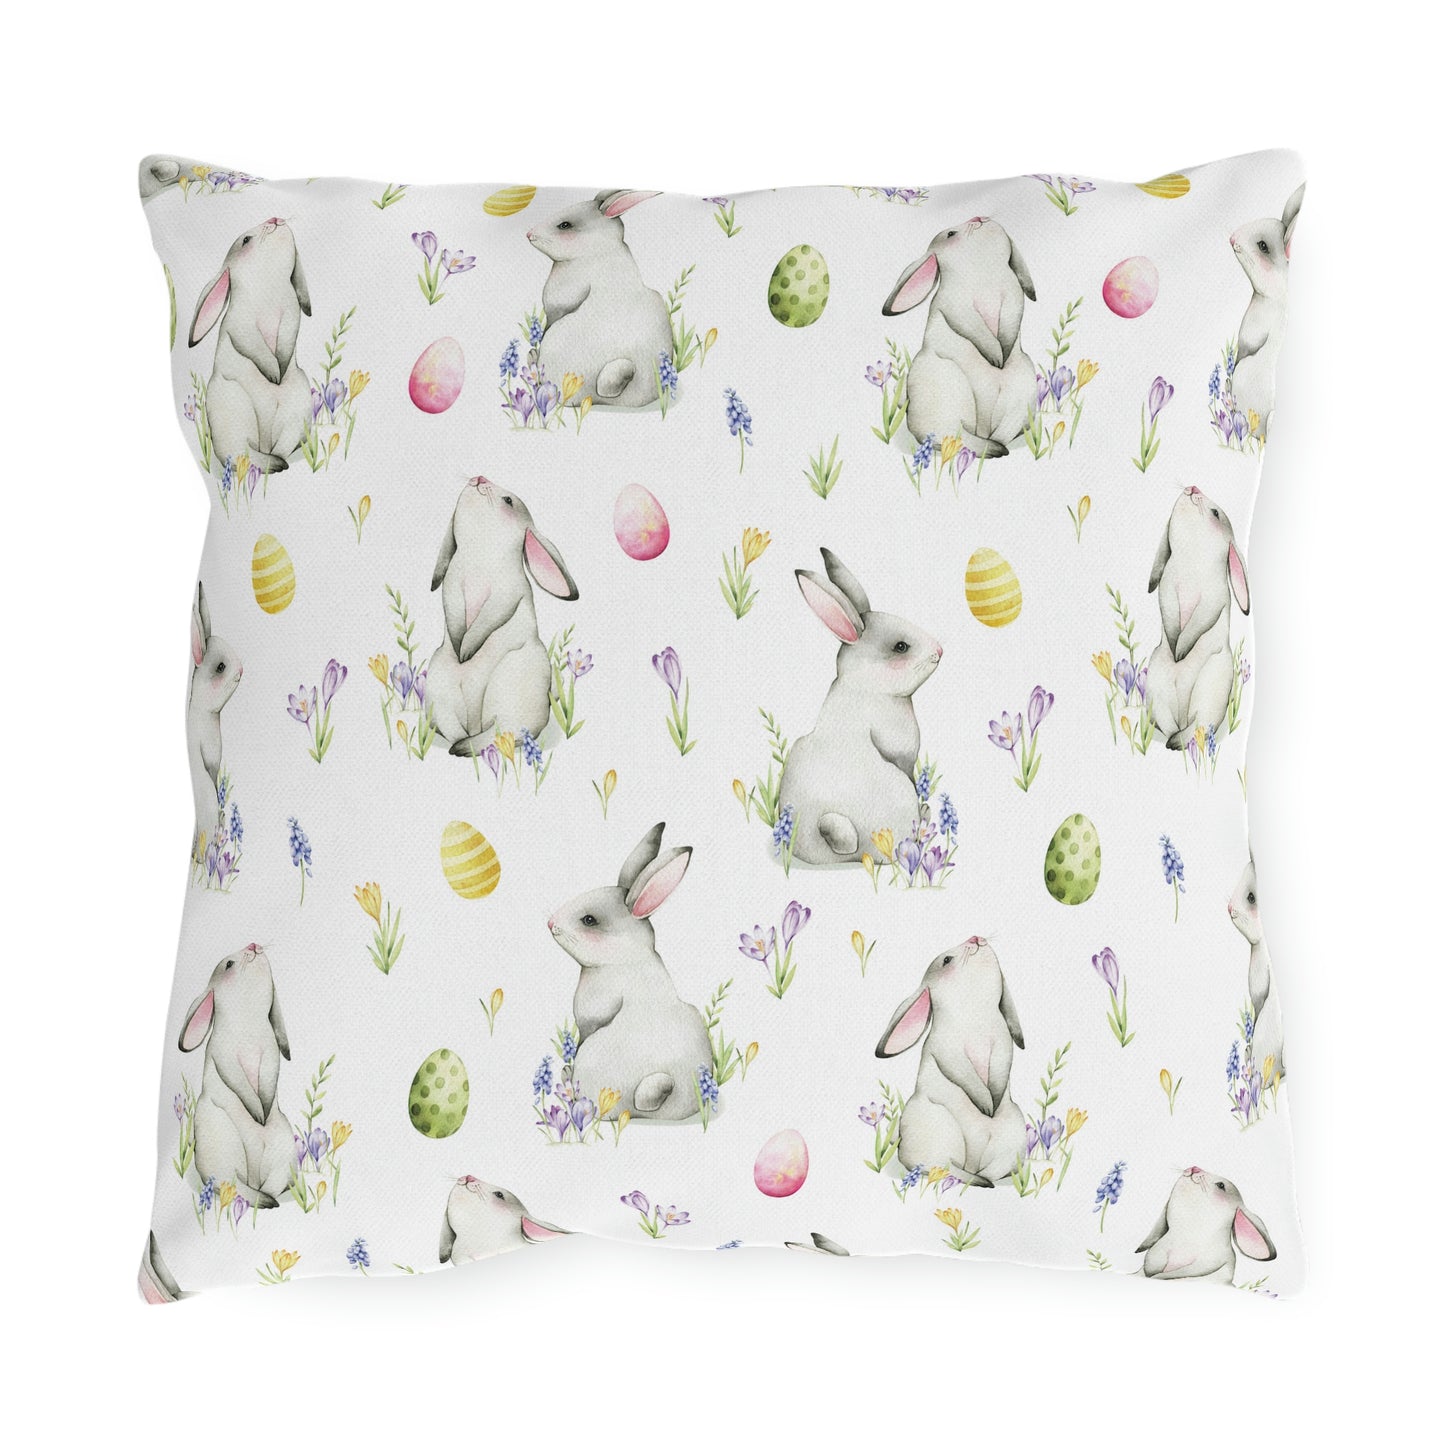 Cottontail Bunnies and Eggs Outdoor Pillow